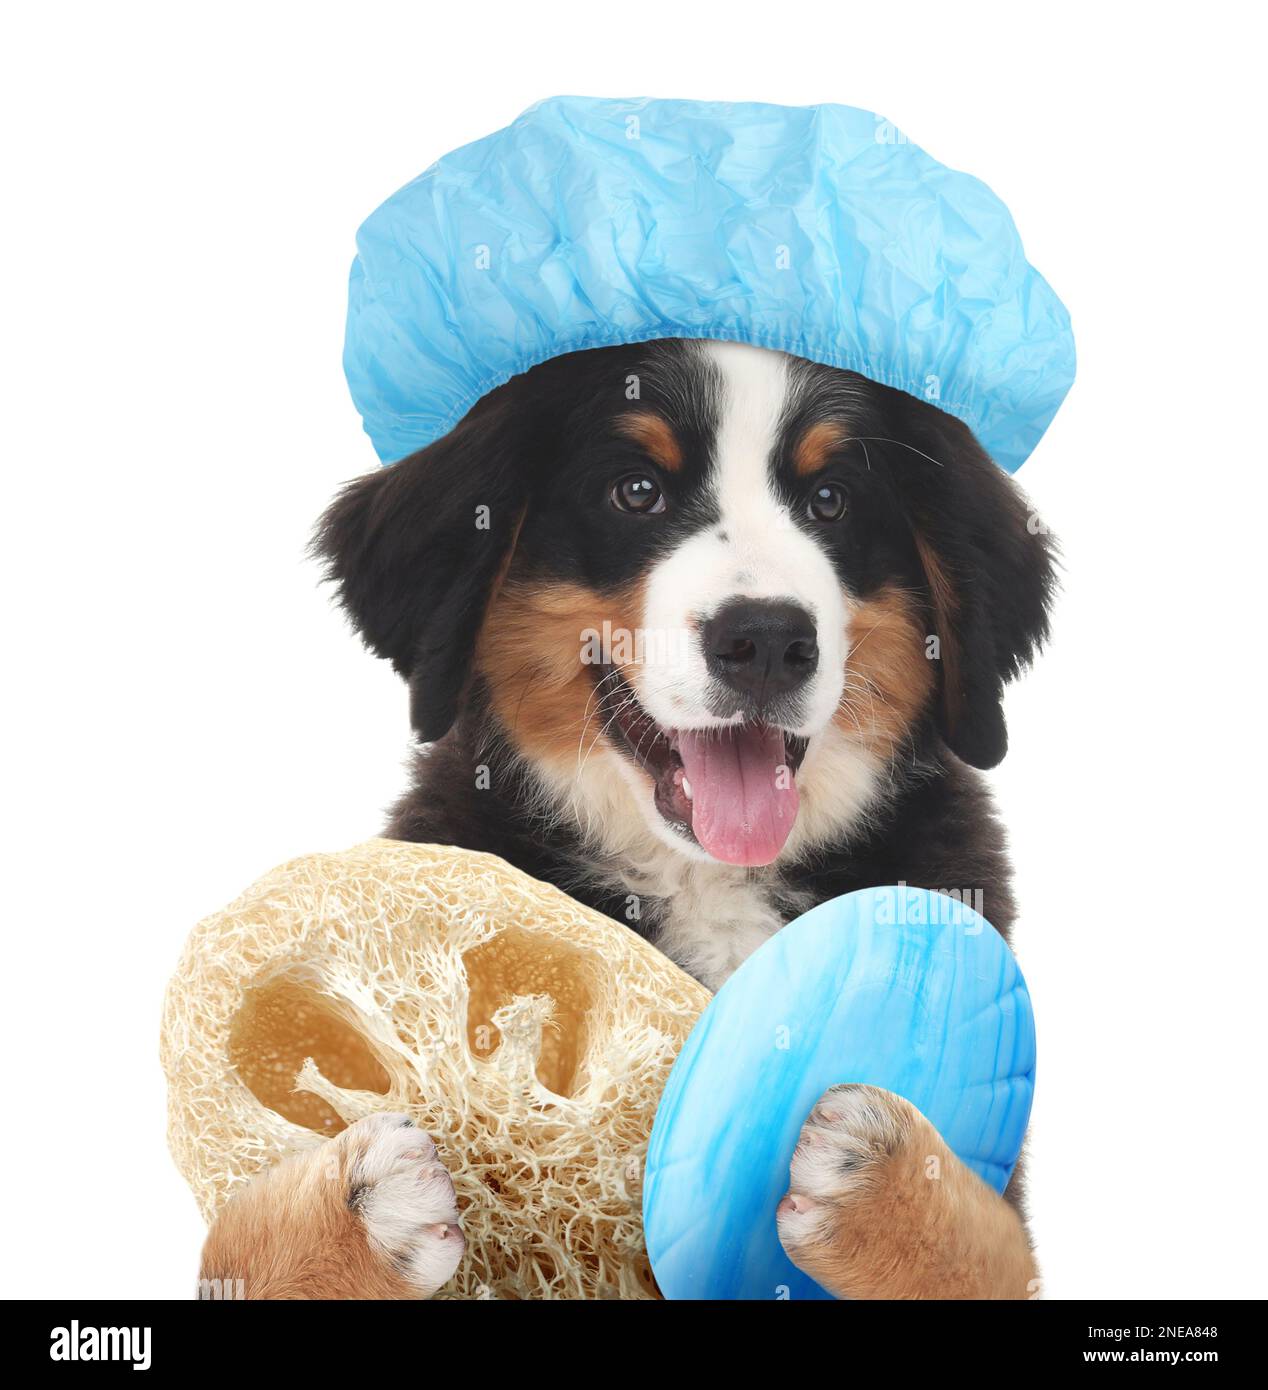 Cute funny dog with shower cap and different accessories for bathing on white background Stock Photo